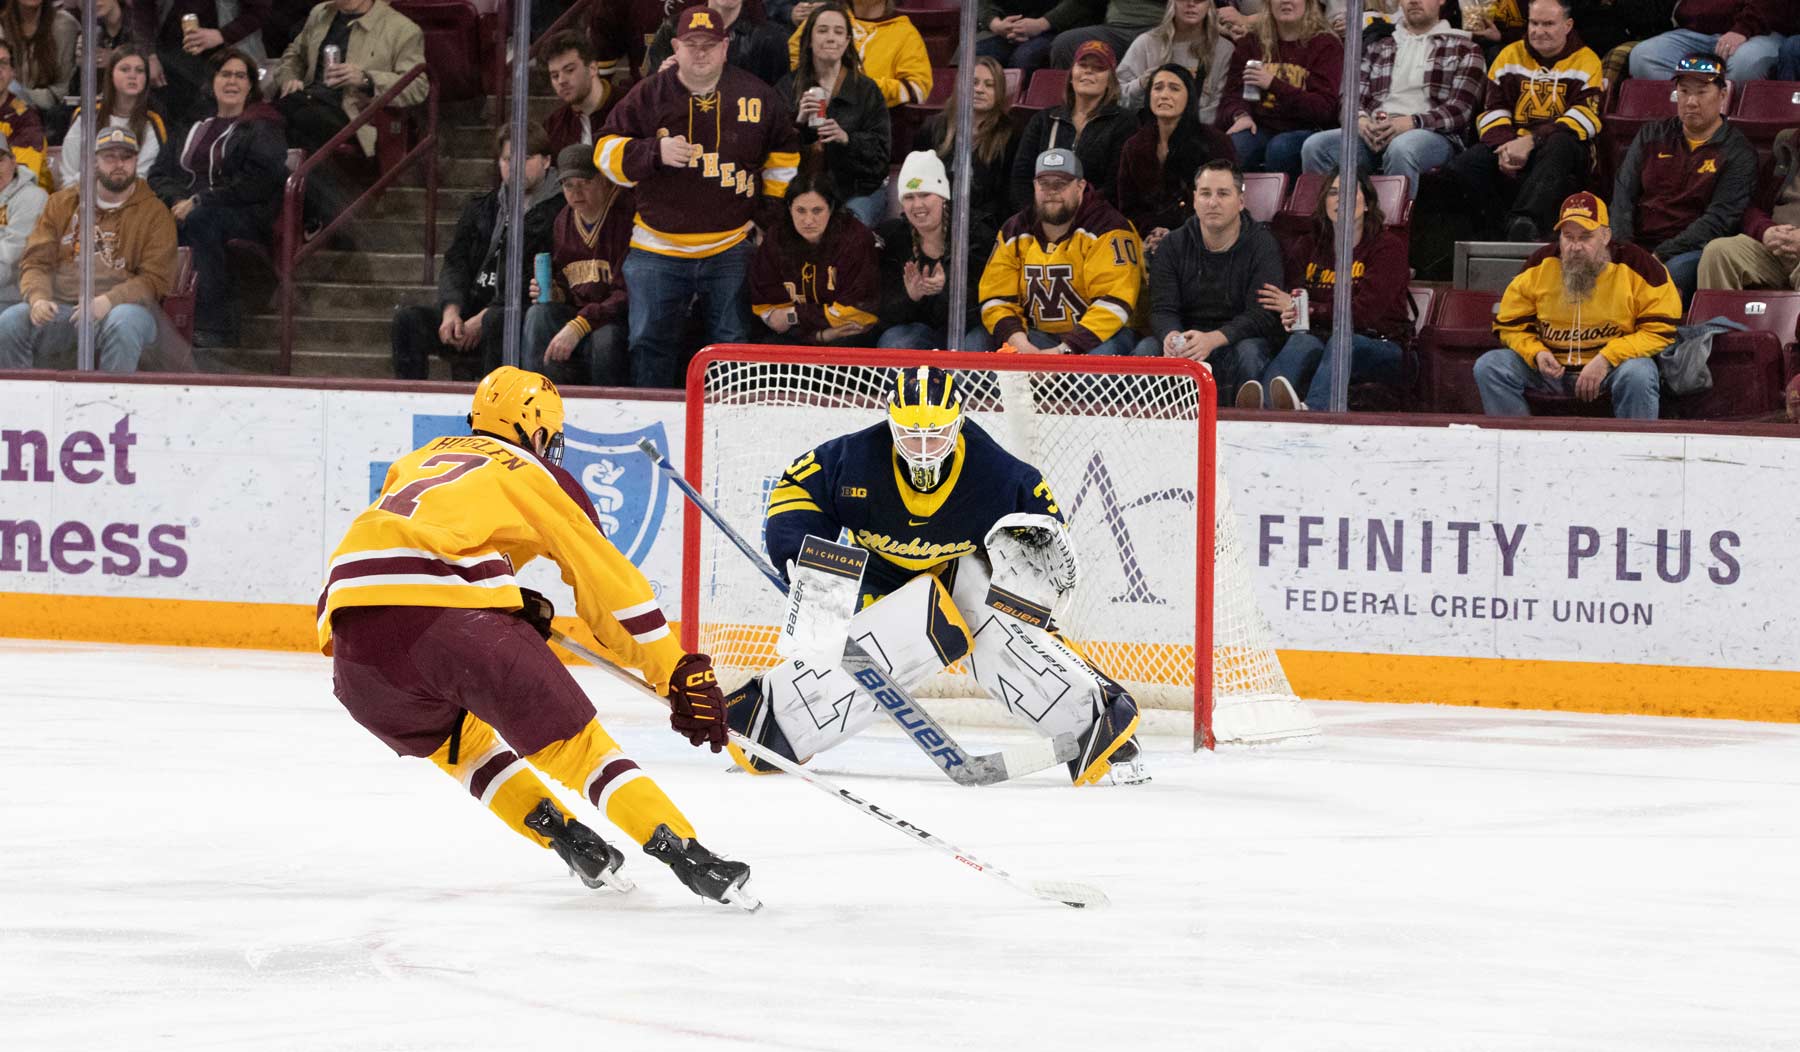 Gophers Come Back from 3 Down in Third, Michigan Wins in OT